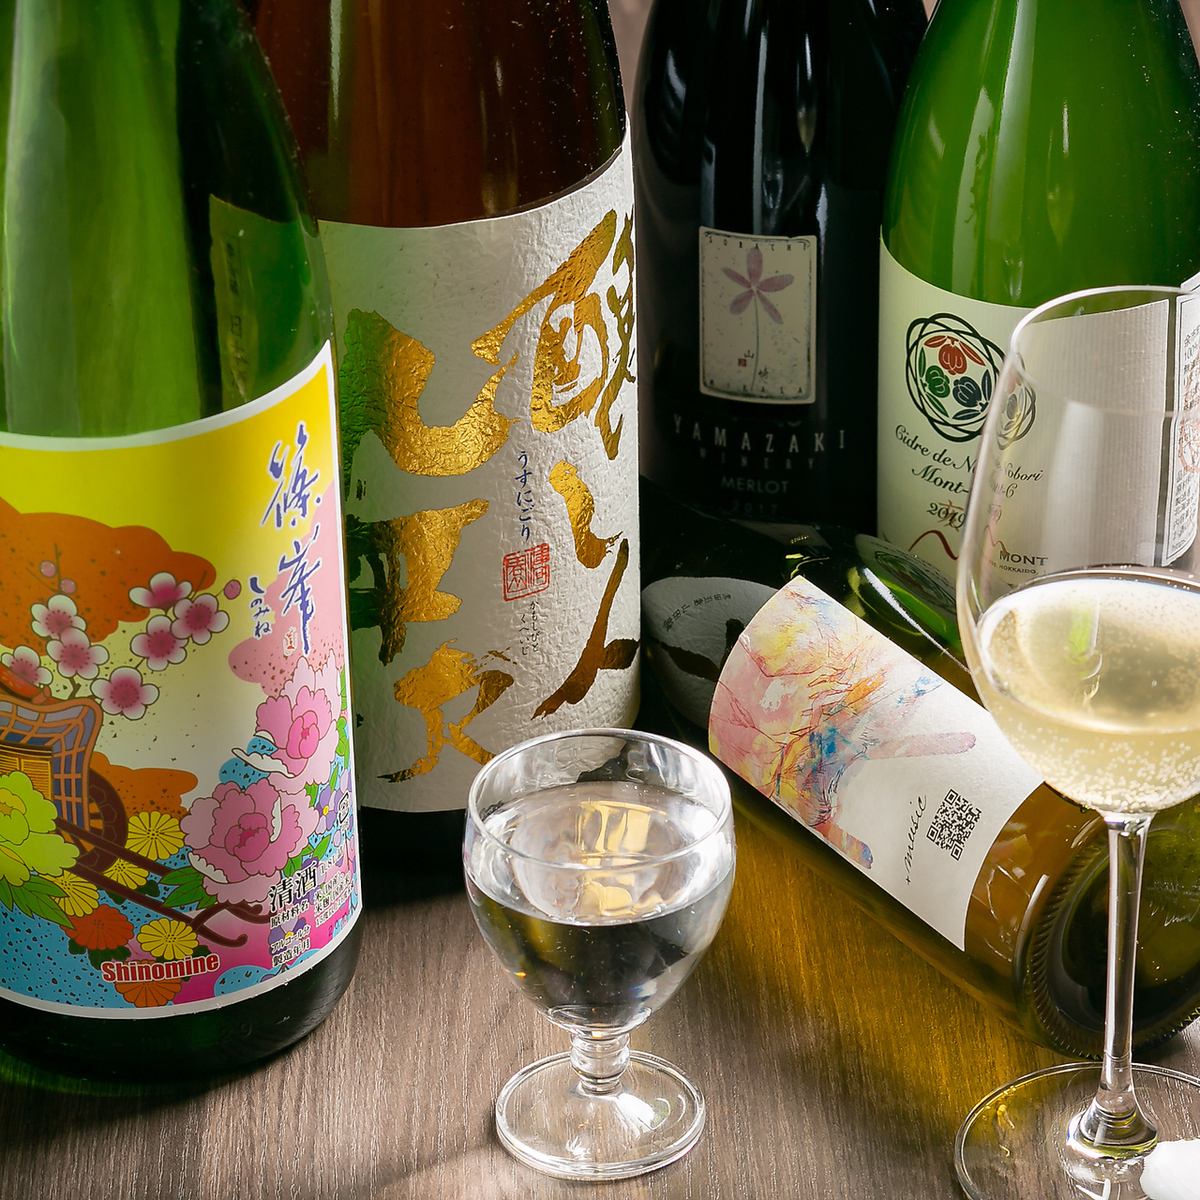 All-you-can-drink for 2 hours, including about 40 types of sake, 12 types of wine, and draft beer, for 2,500 yen!